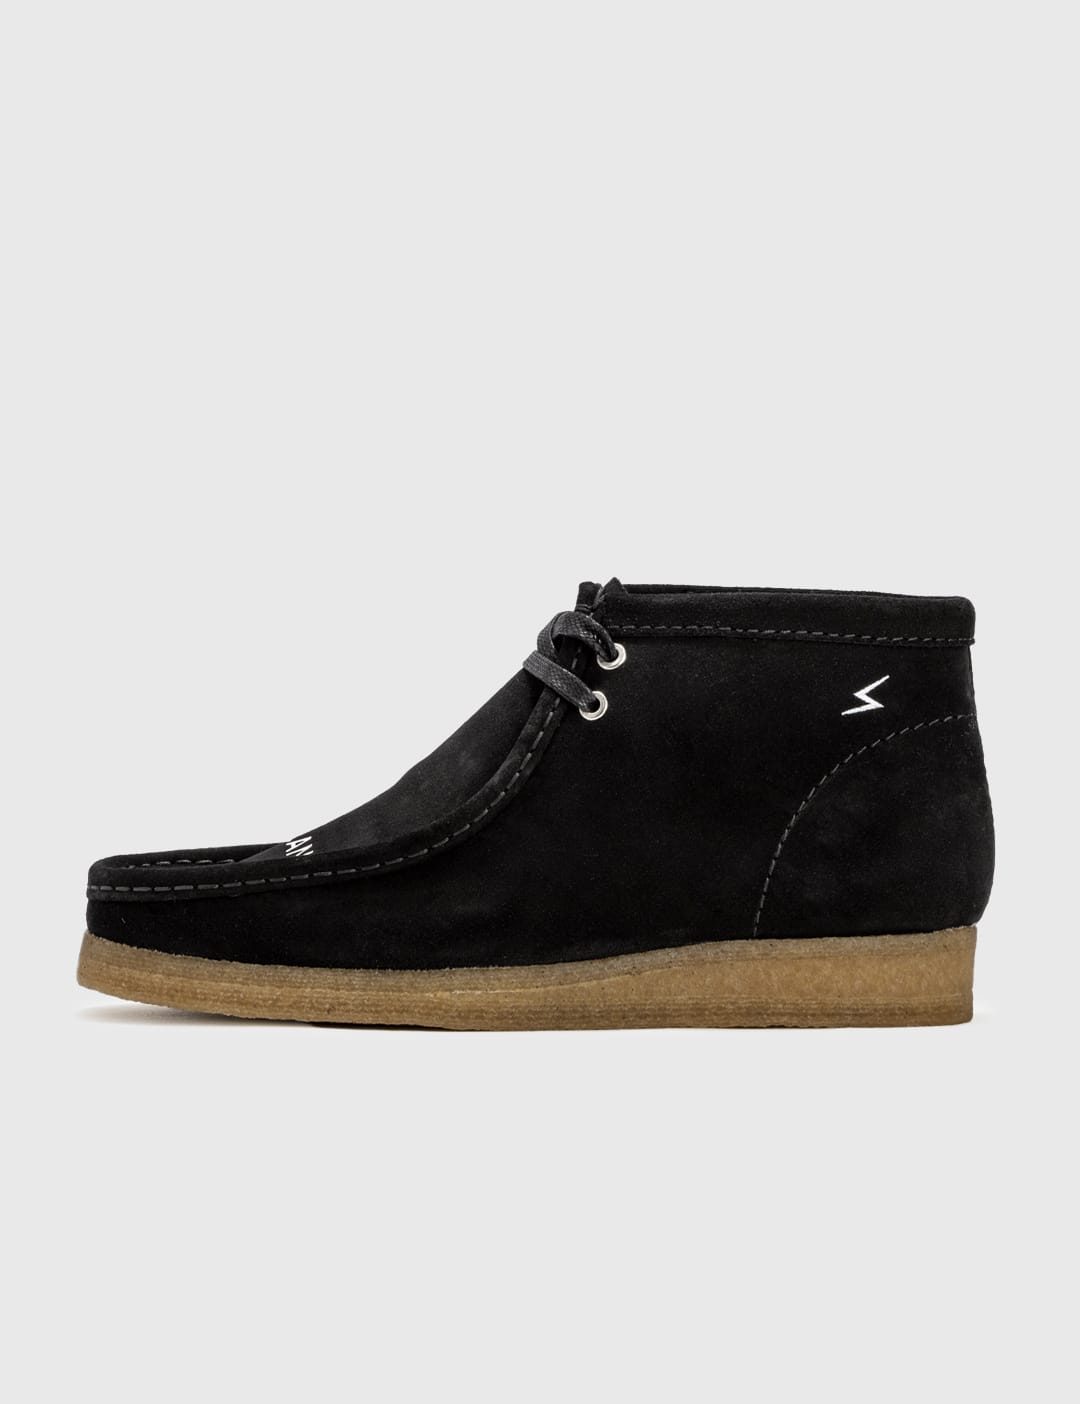 UNDERCOVER x Clarks Wallabee Boot